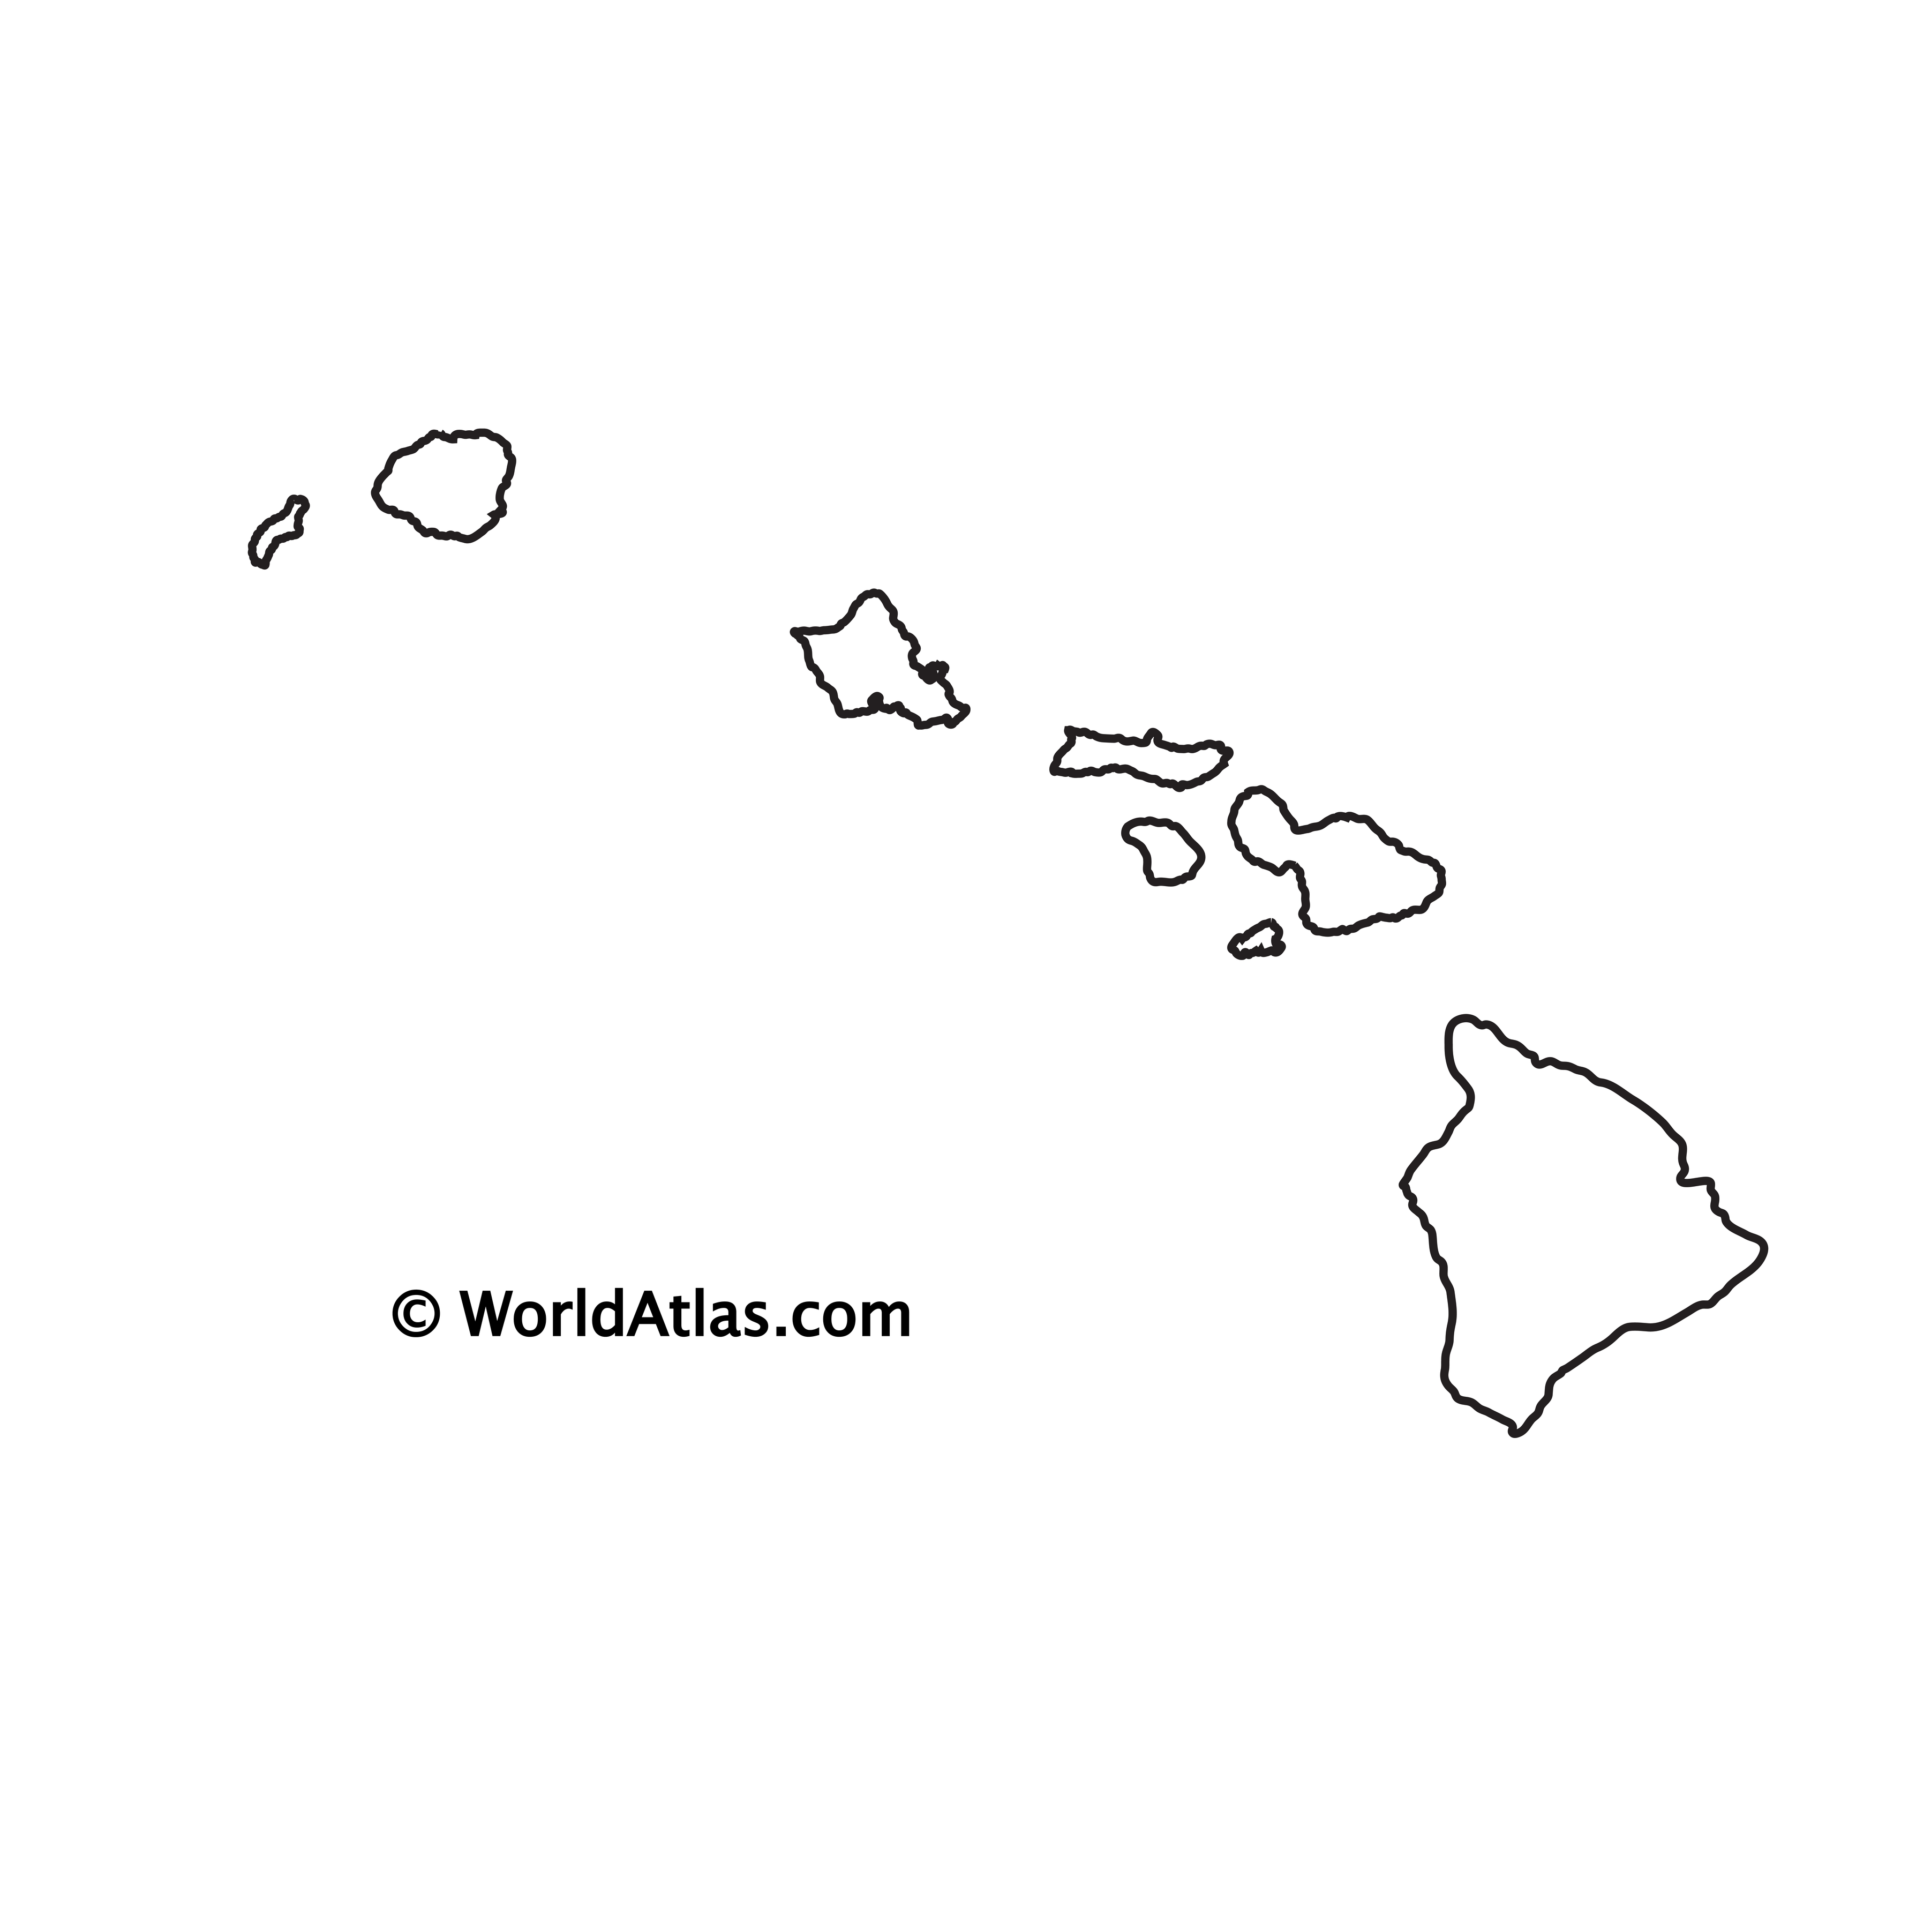 Hawaii Us State Blank Map Image Mapa Polityczna Features Outline ...